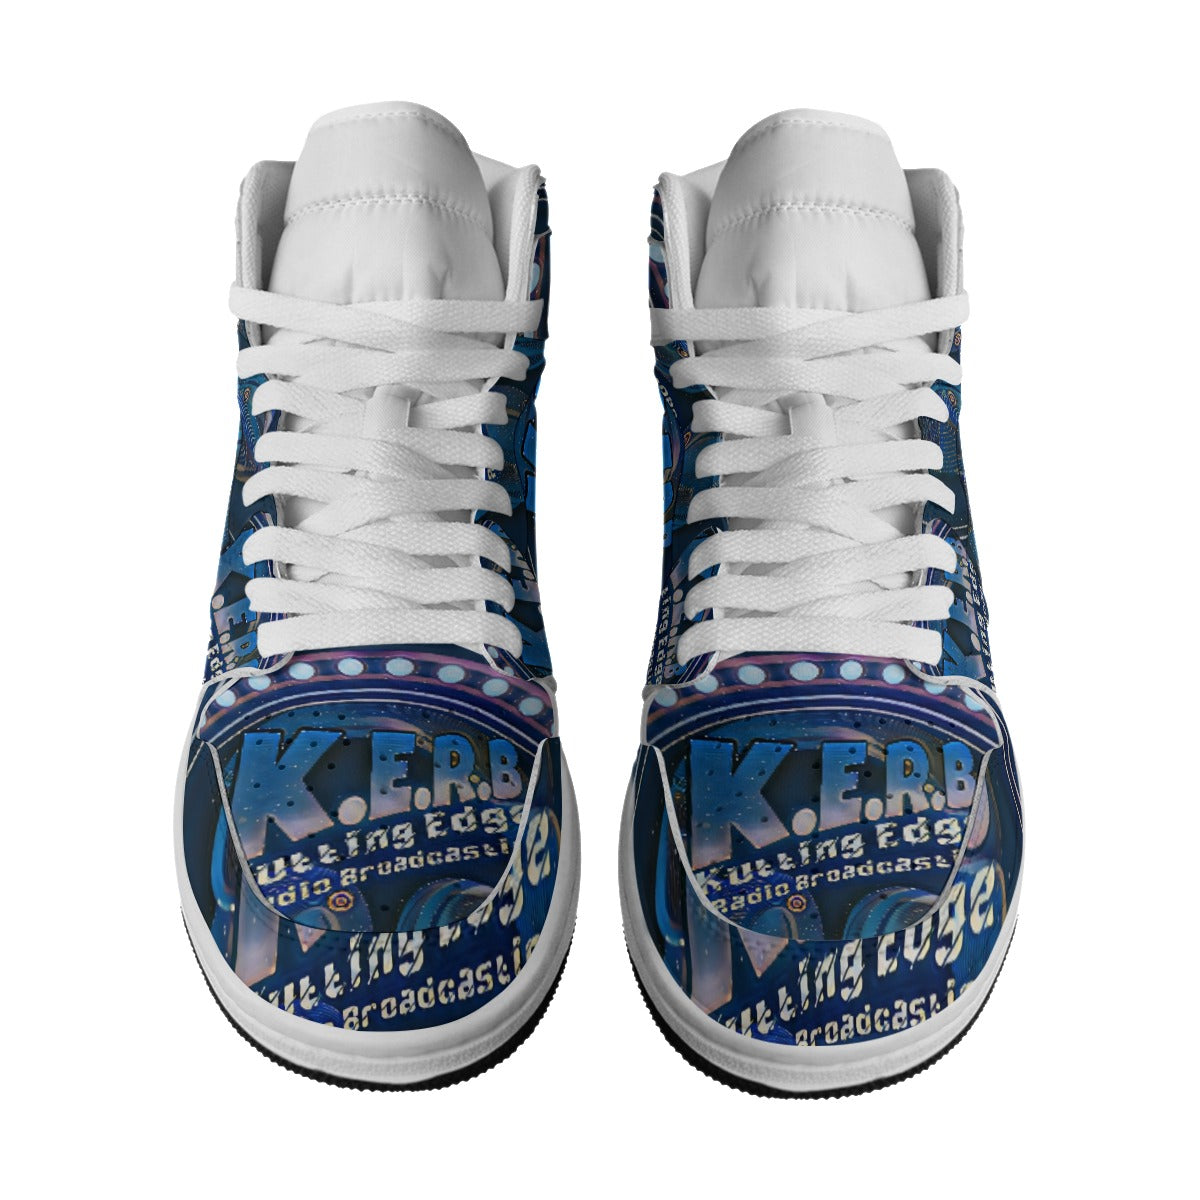 Galaxy KERB Logo Men's Leather High-Top Sneakers